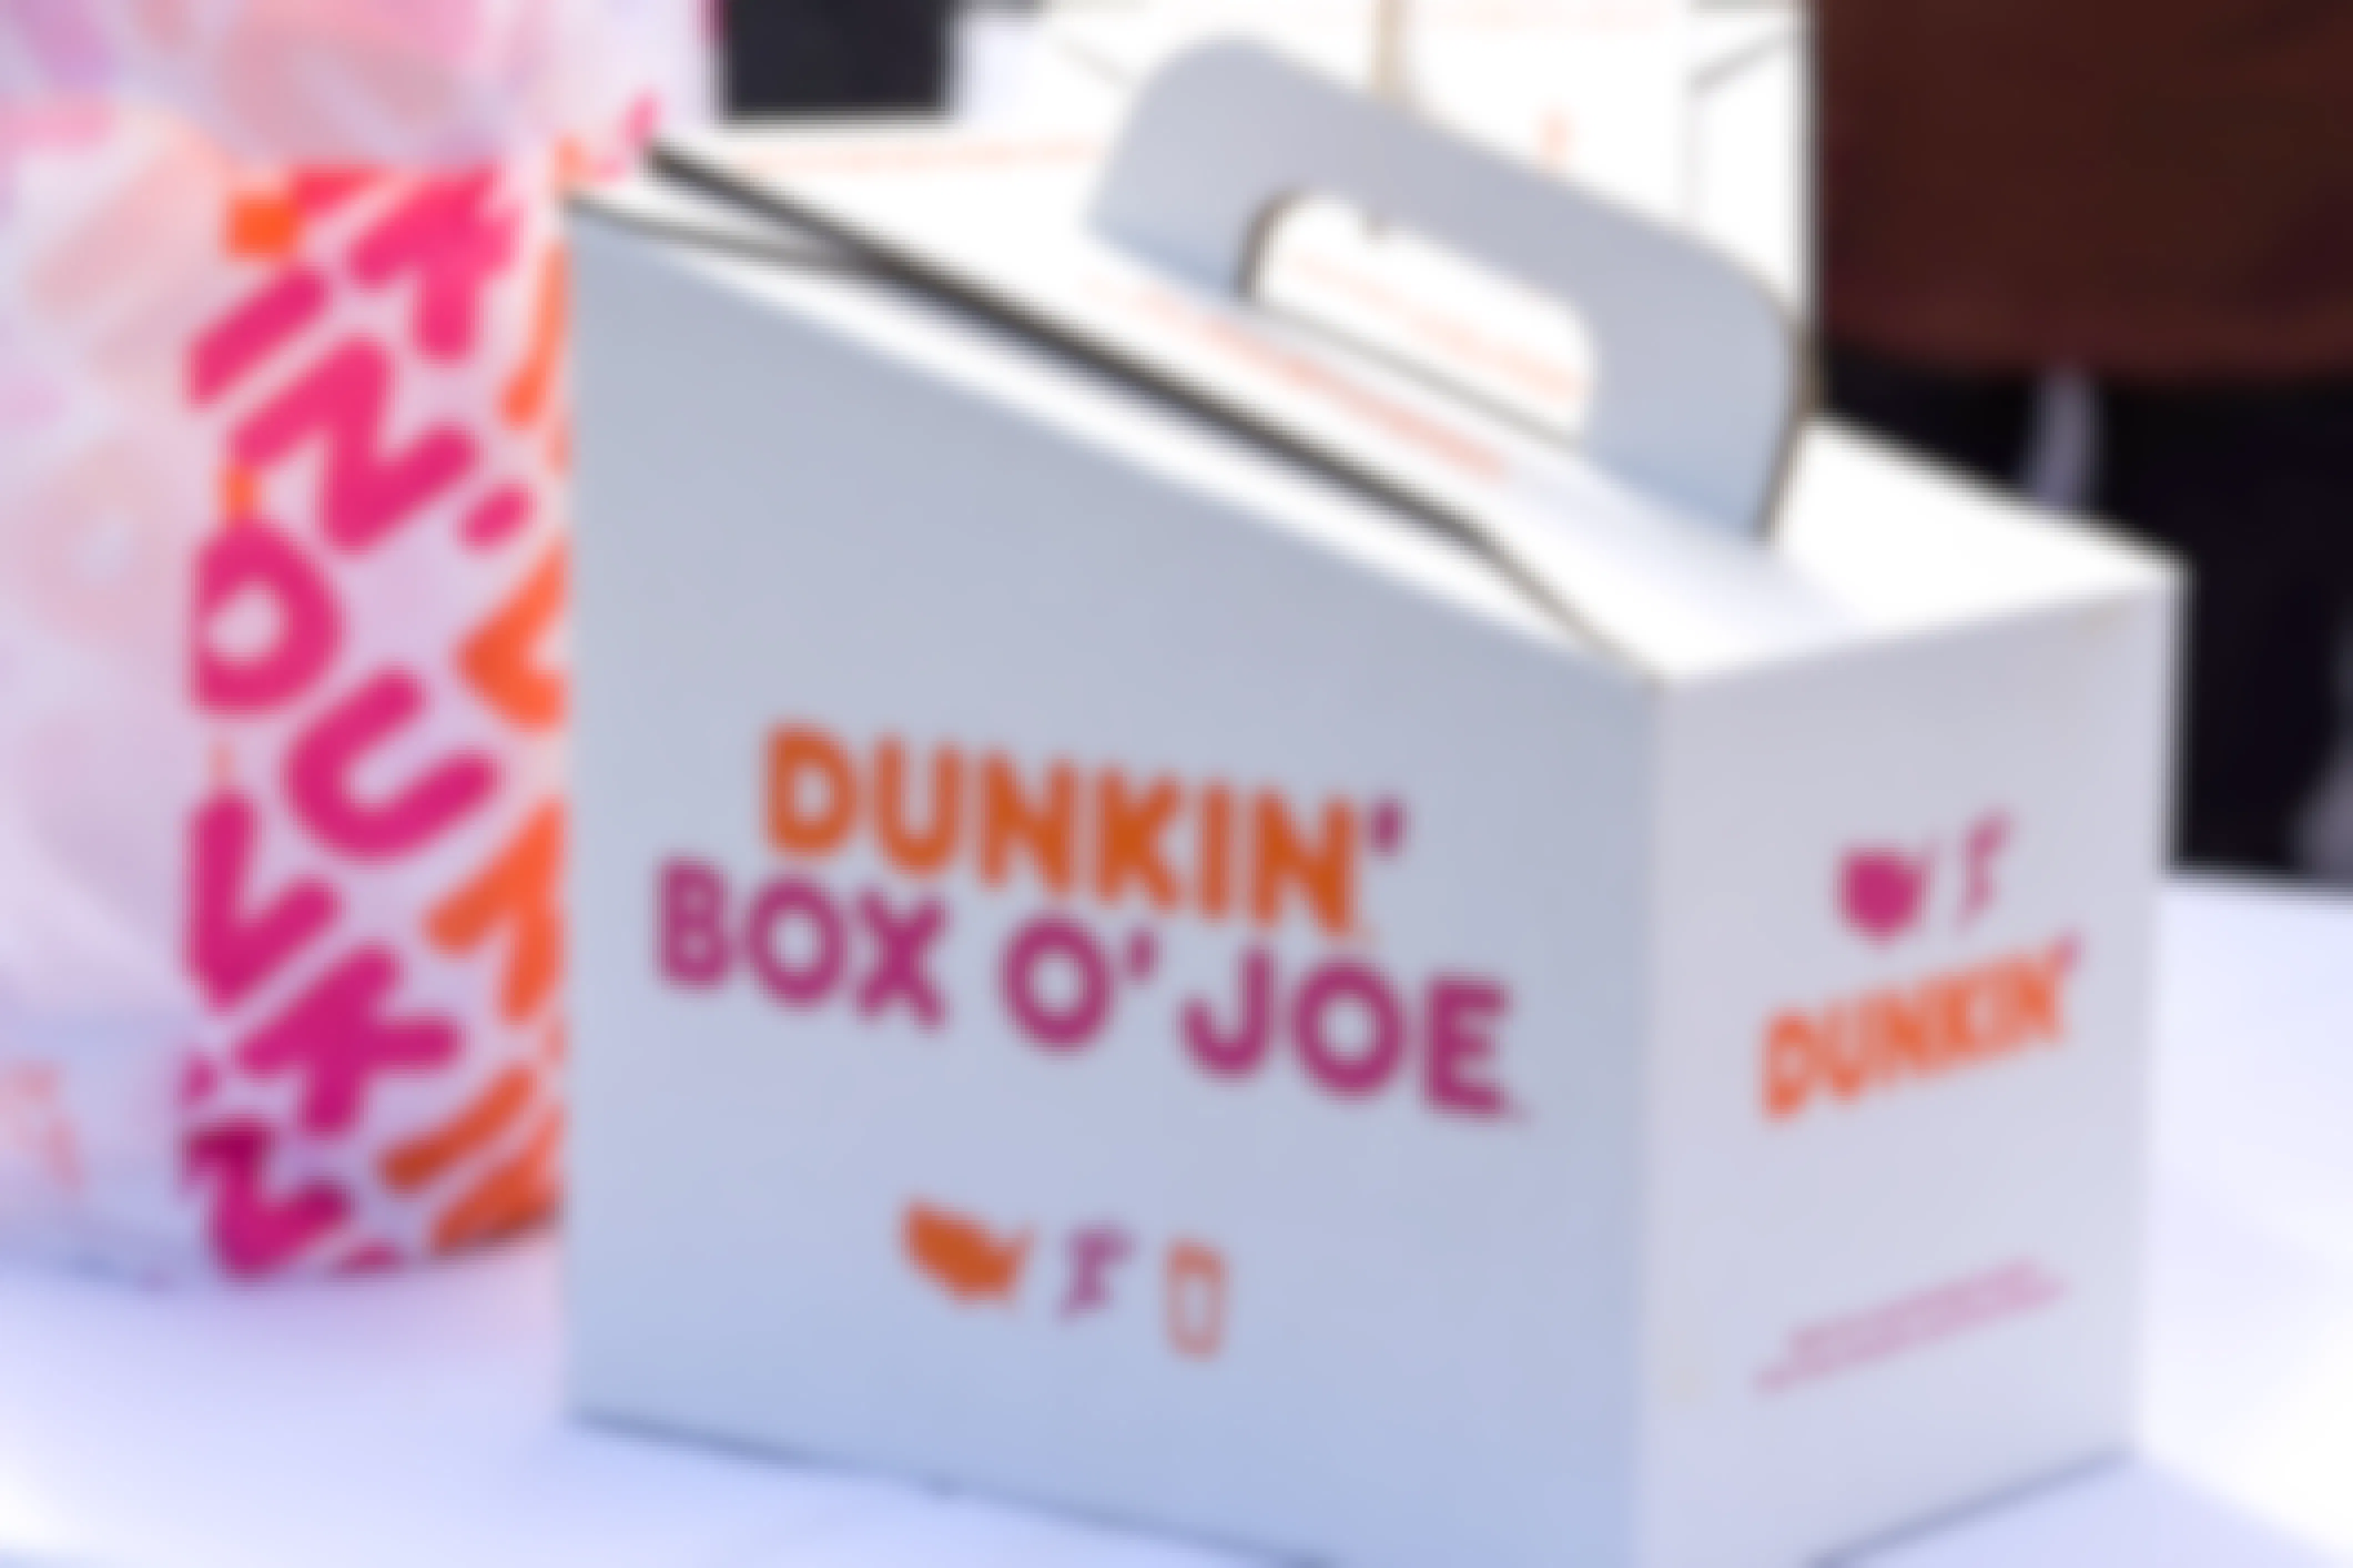 A Dunkin Donuts coffee Box O' Joe on a table next to some Dunkin to-go bags.